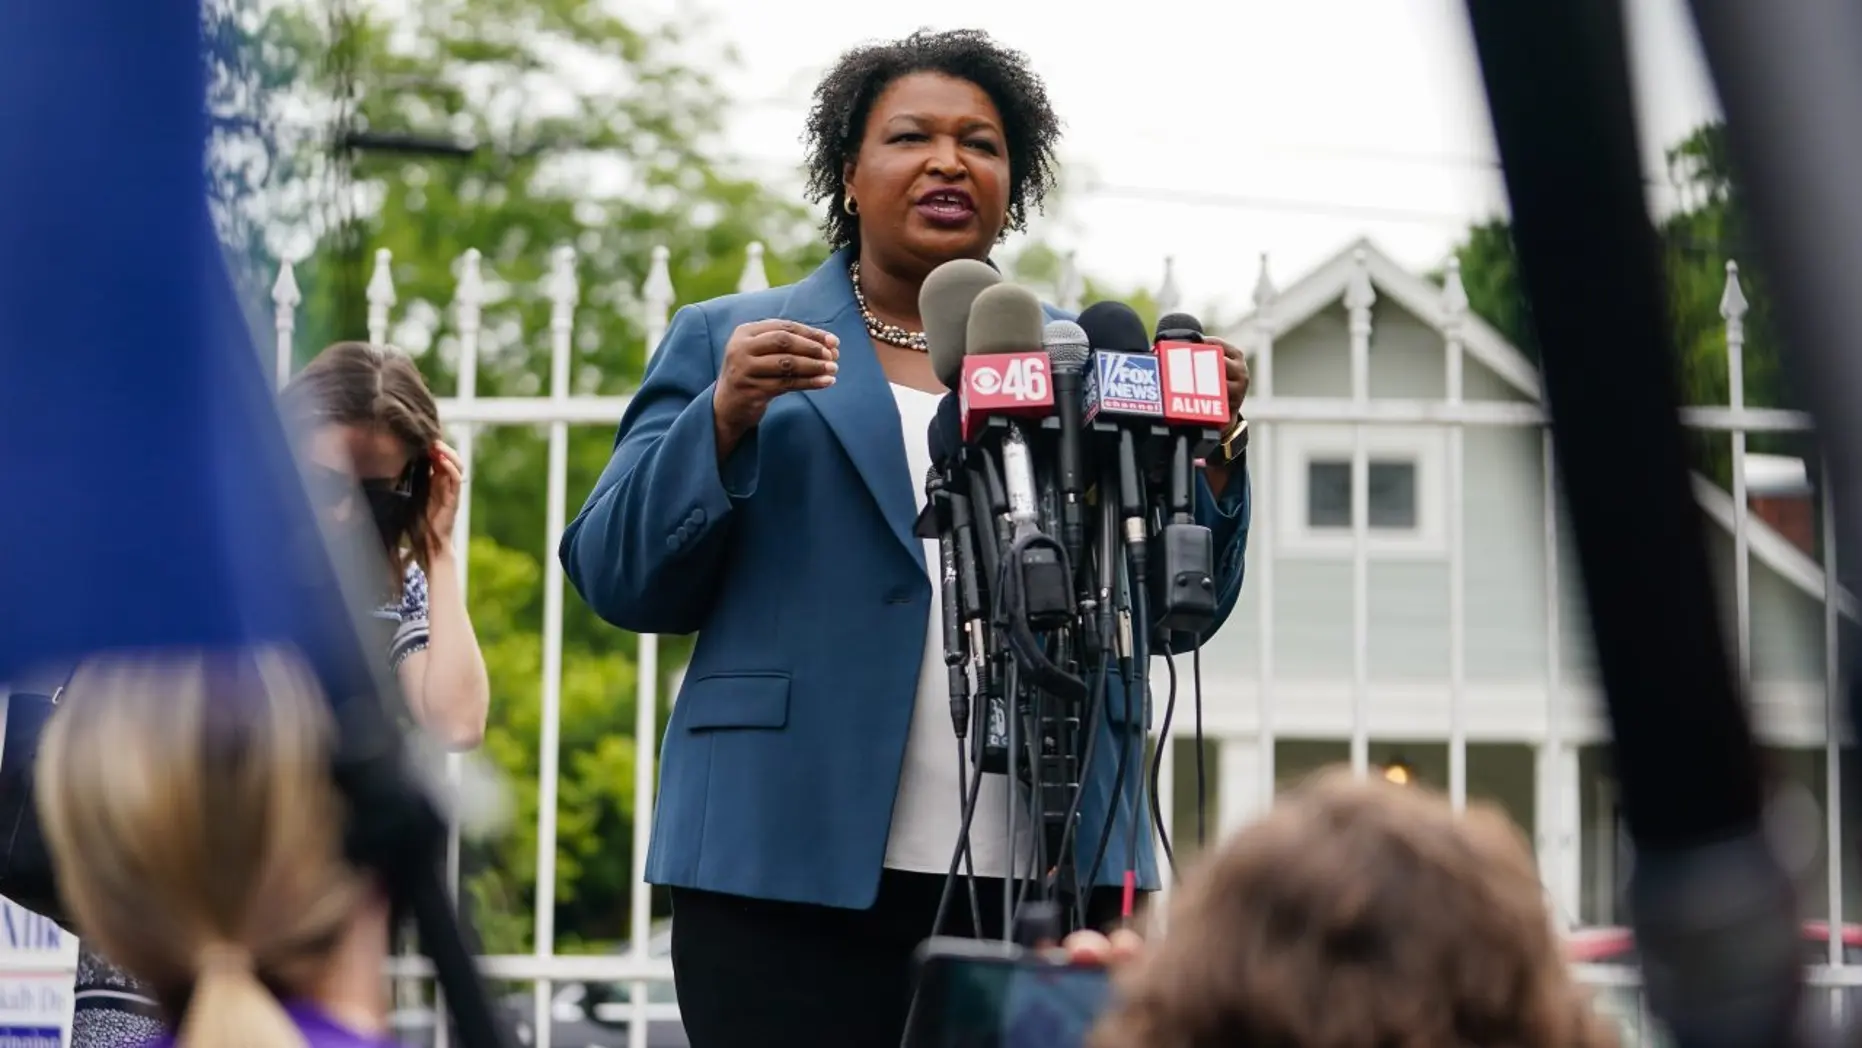 Stacey Abrams on board of foundation awarding millions to woke professors pushing prison abolition, CRT